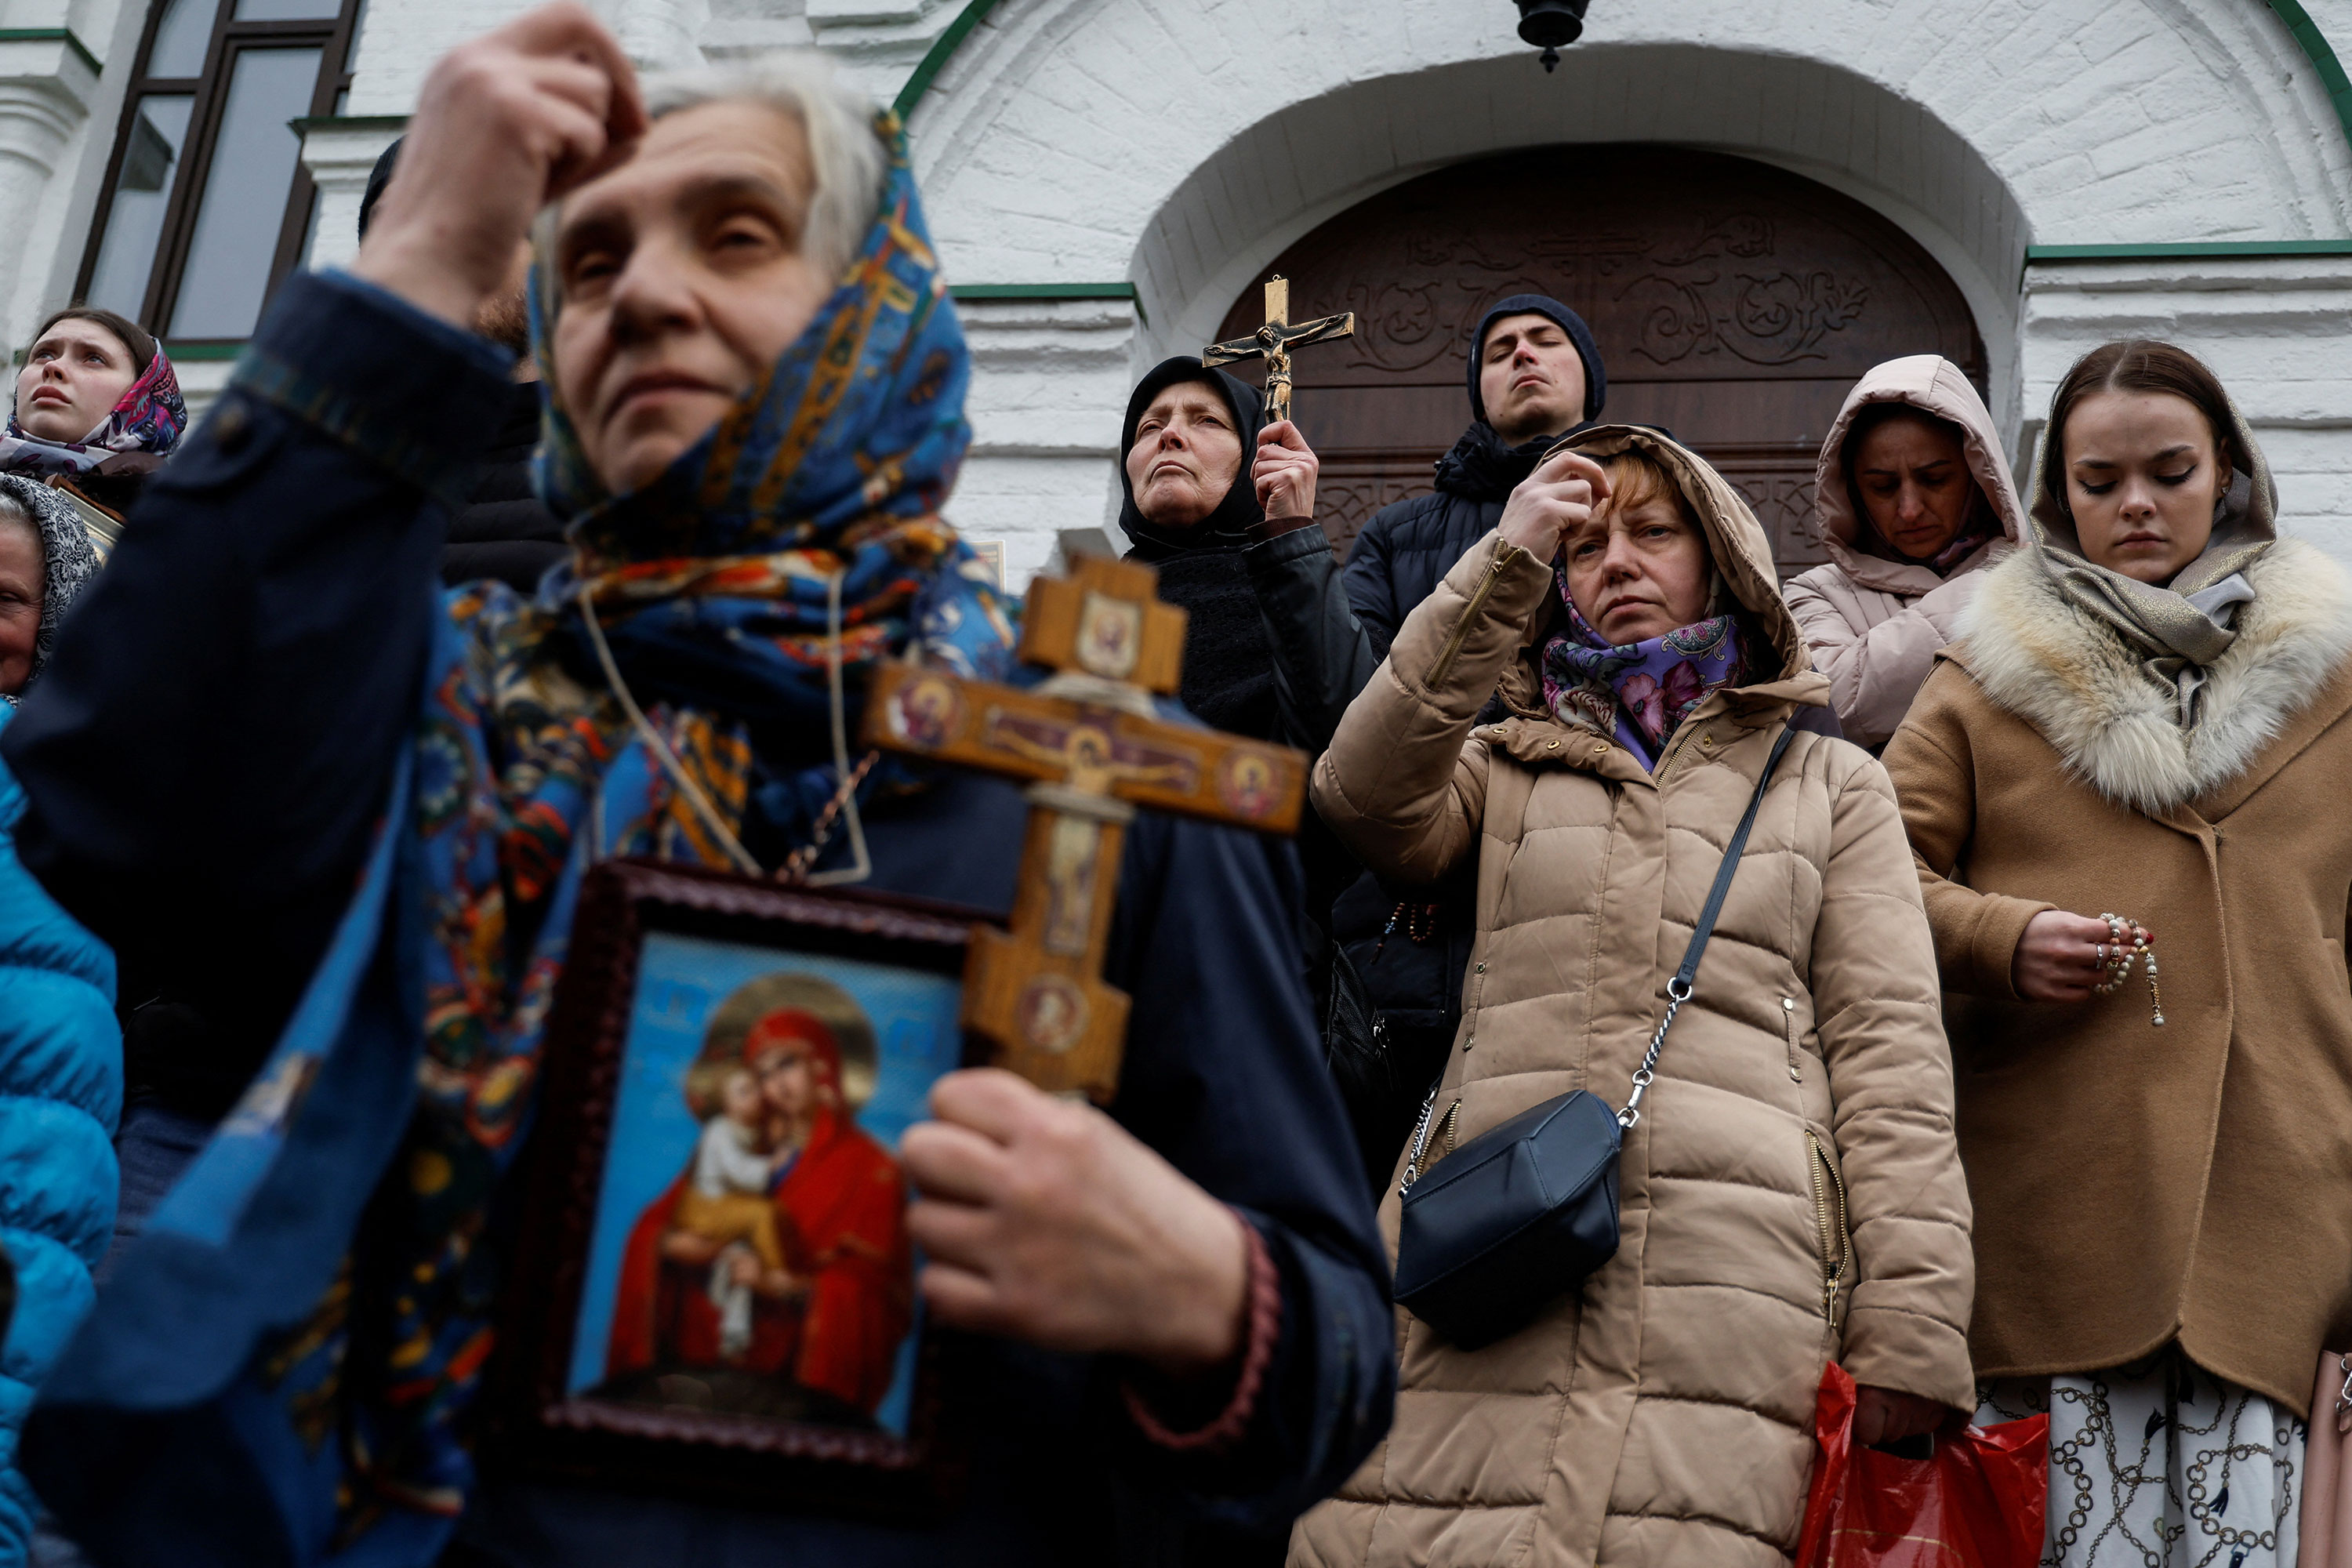 Devotees block the entrance to the church during prayers in the compound of the Kiev-Pechersk Lavra monastery in Kiev on March 31. 